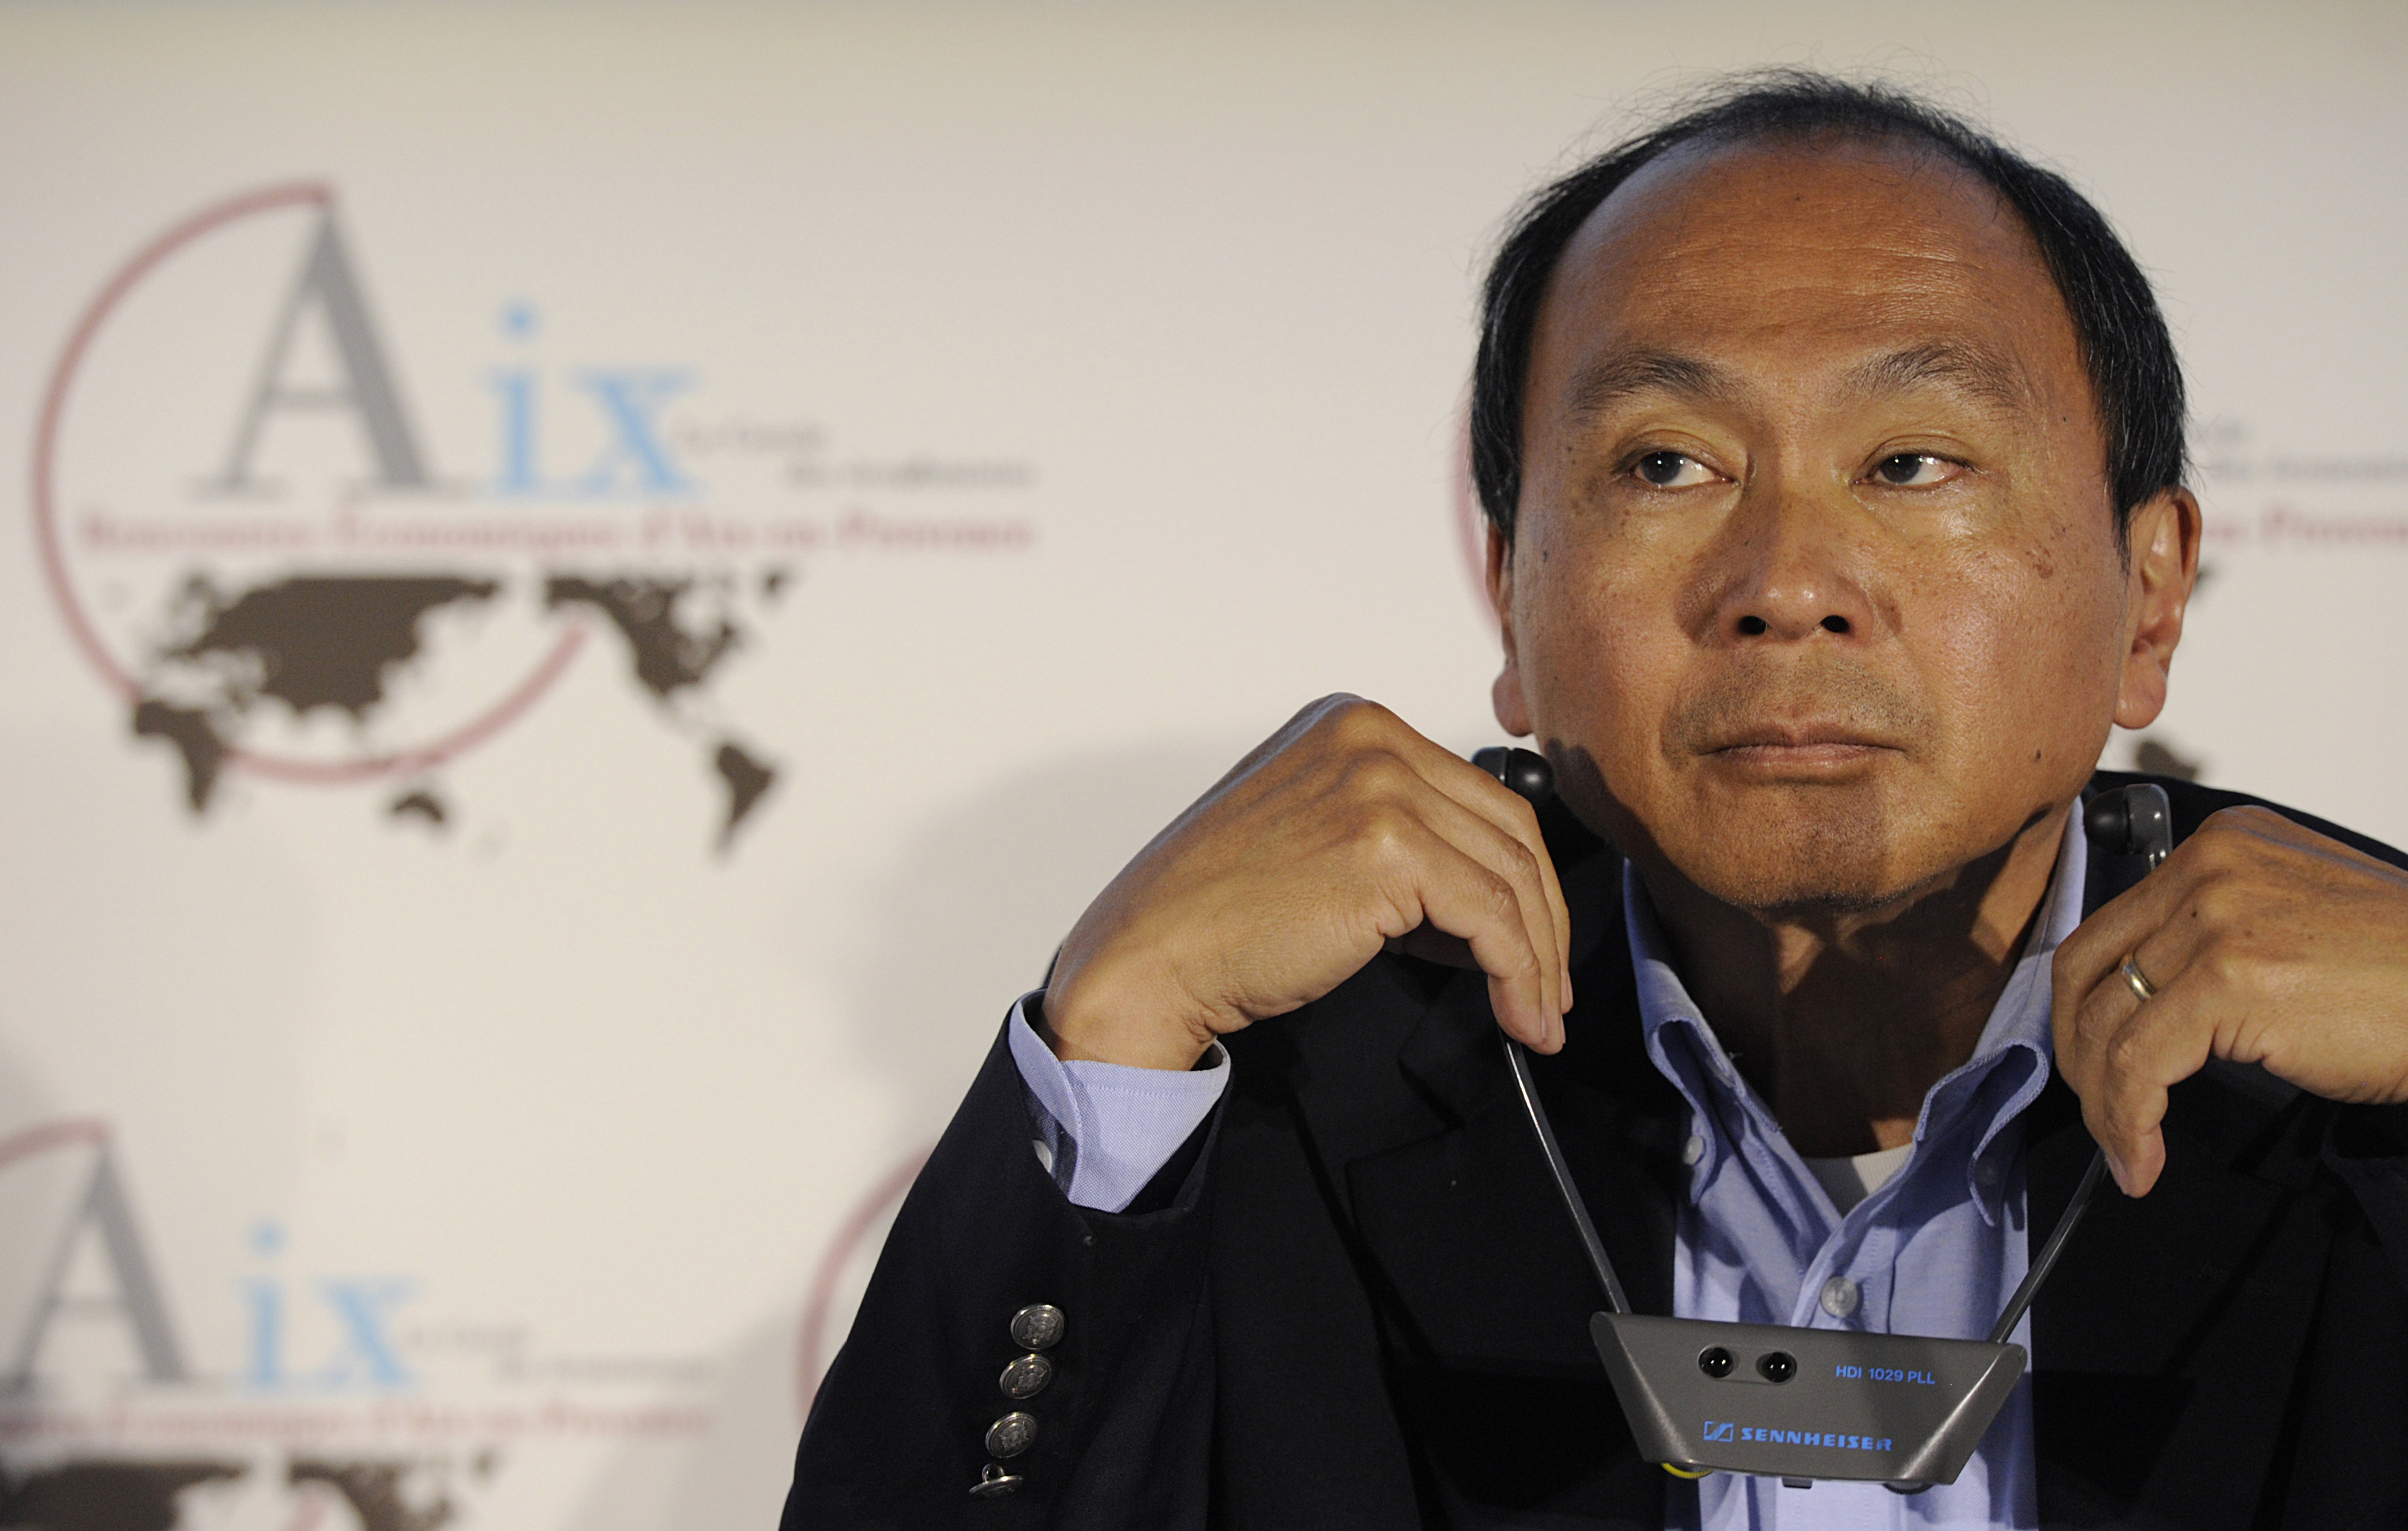 American political economist, chairman of the editorial board of The American Interest and author Francis Fukuyama, attends a conference during the first day of the 2013 Economic Forum in Aix-en-Provence (Rencontres Economiques d'Aix-en-Provence) on July 5, 2013